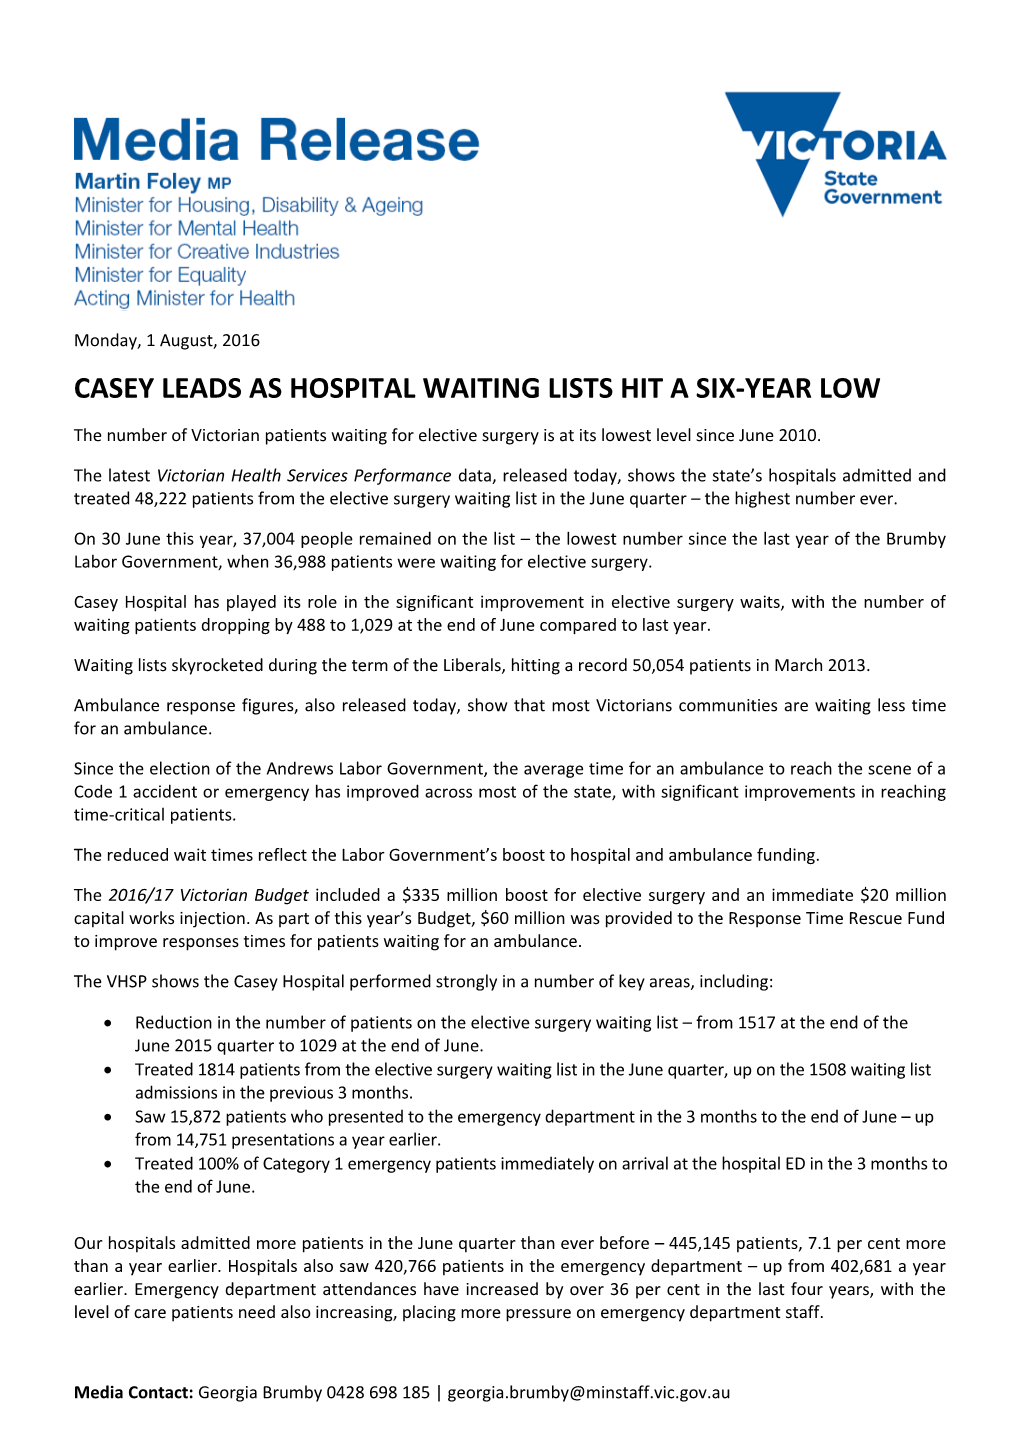 Casey Leads As Hospital Waiting Lists Hit a Six-Year Low